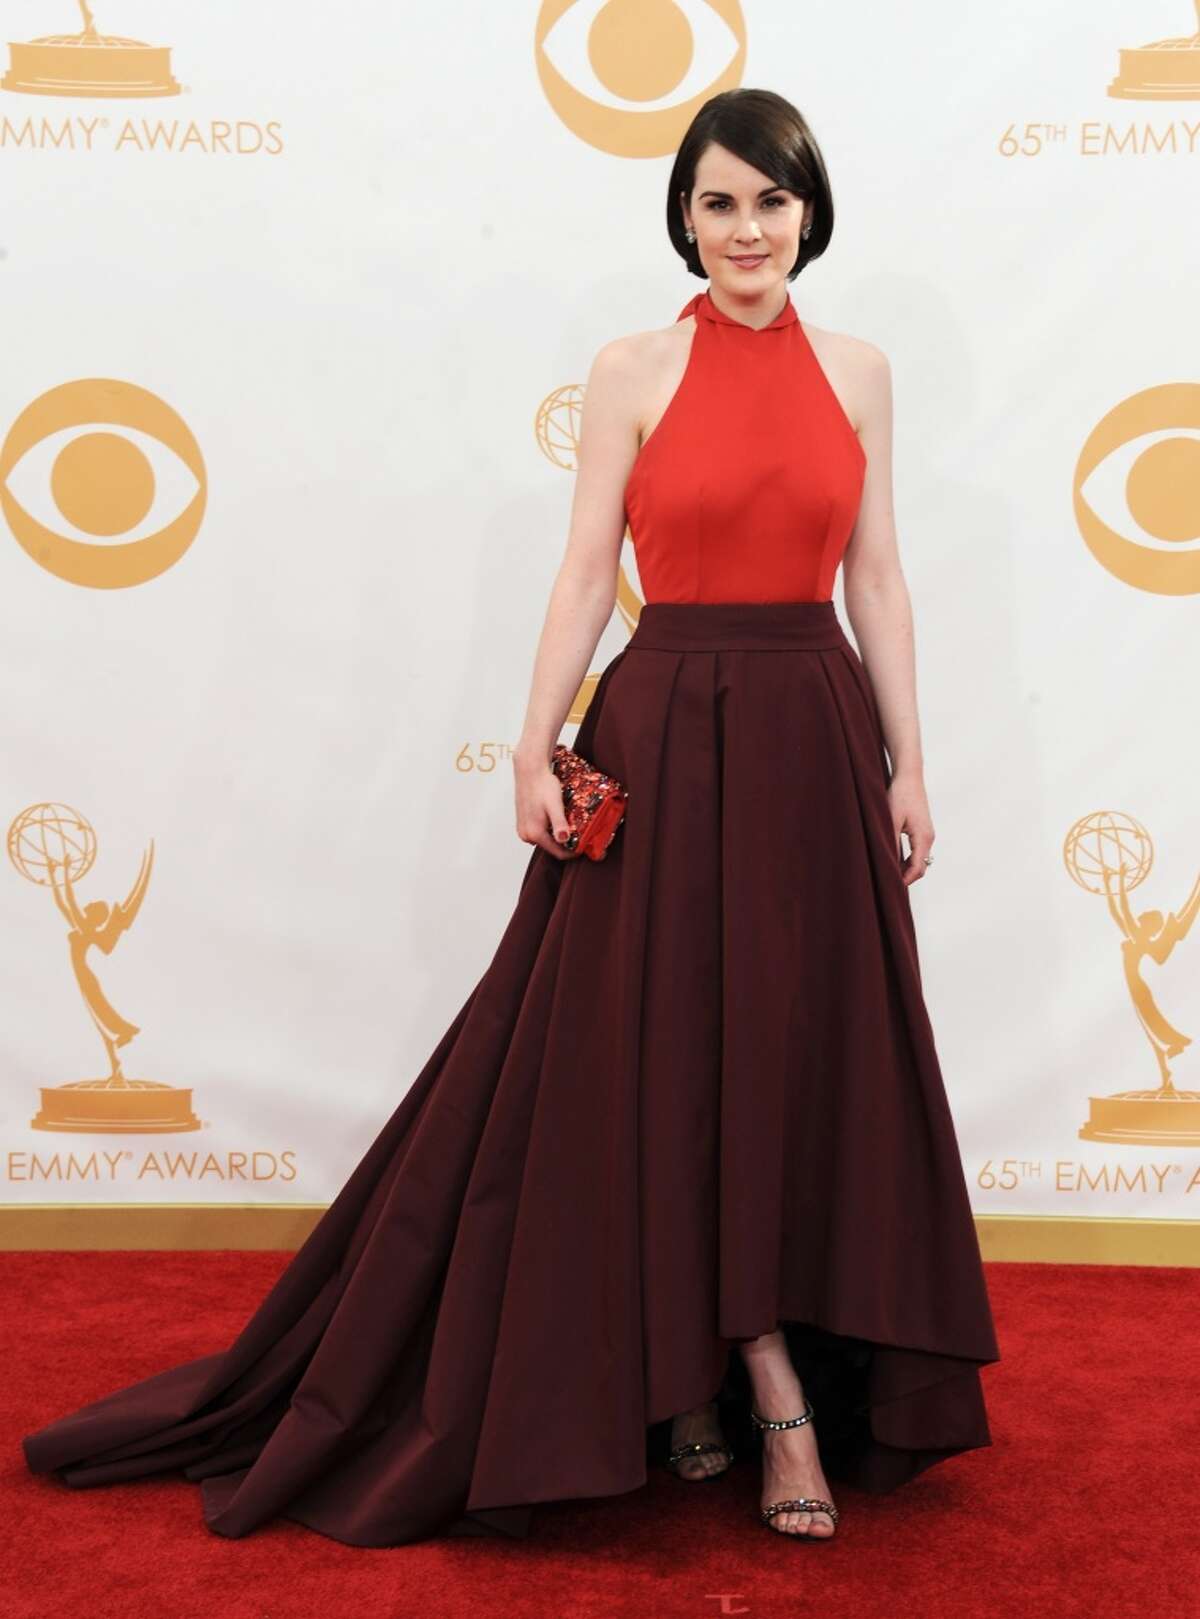 Photos: Red carpet at the Emmys